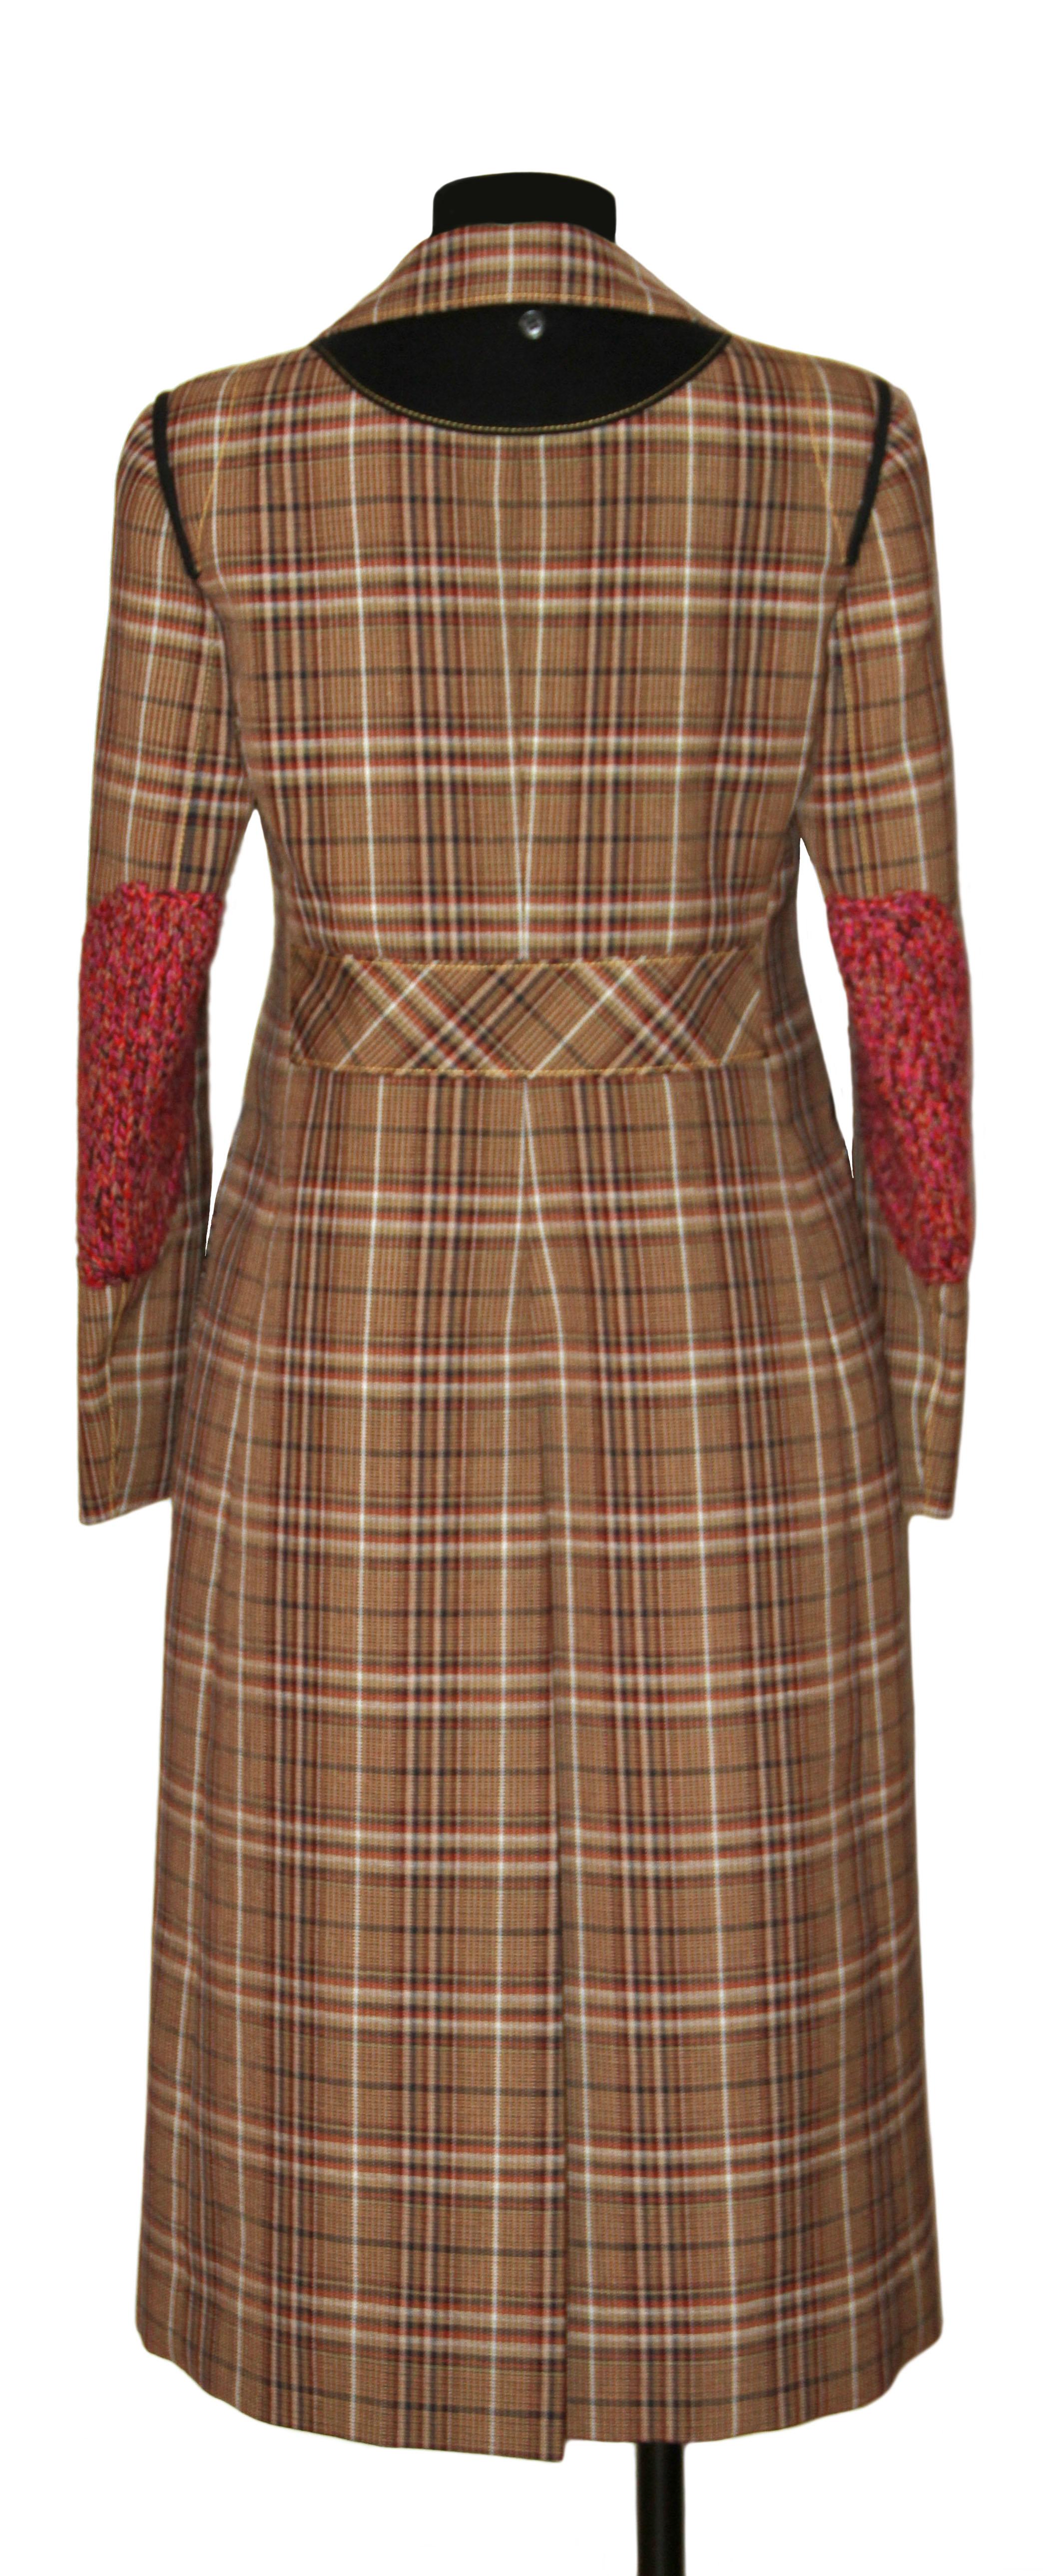 Beautiful coat from the house of Prada. Its classic Prince of Wales checked-weave fabric and its contemporary cut with specific details as slender waist, A-line cut from the waist as well as knit elbows and detachable shearling hood, make this coat